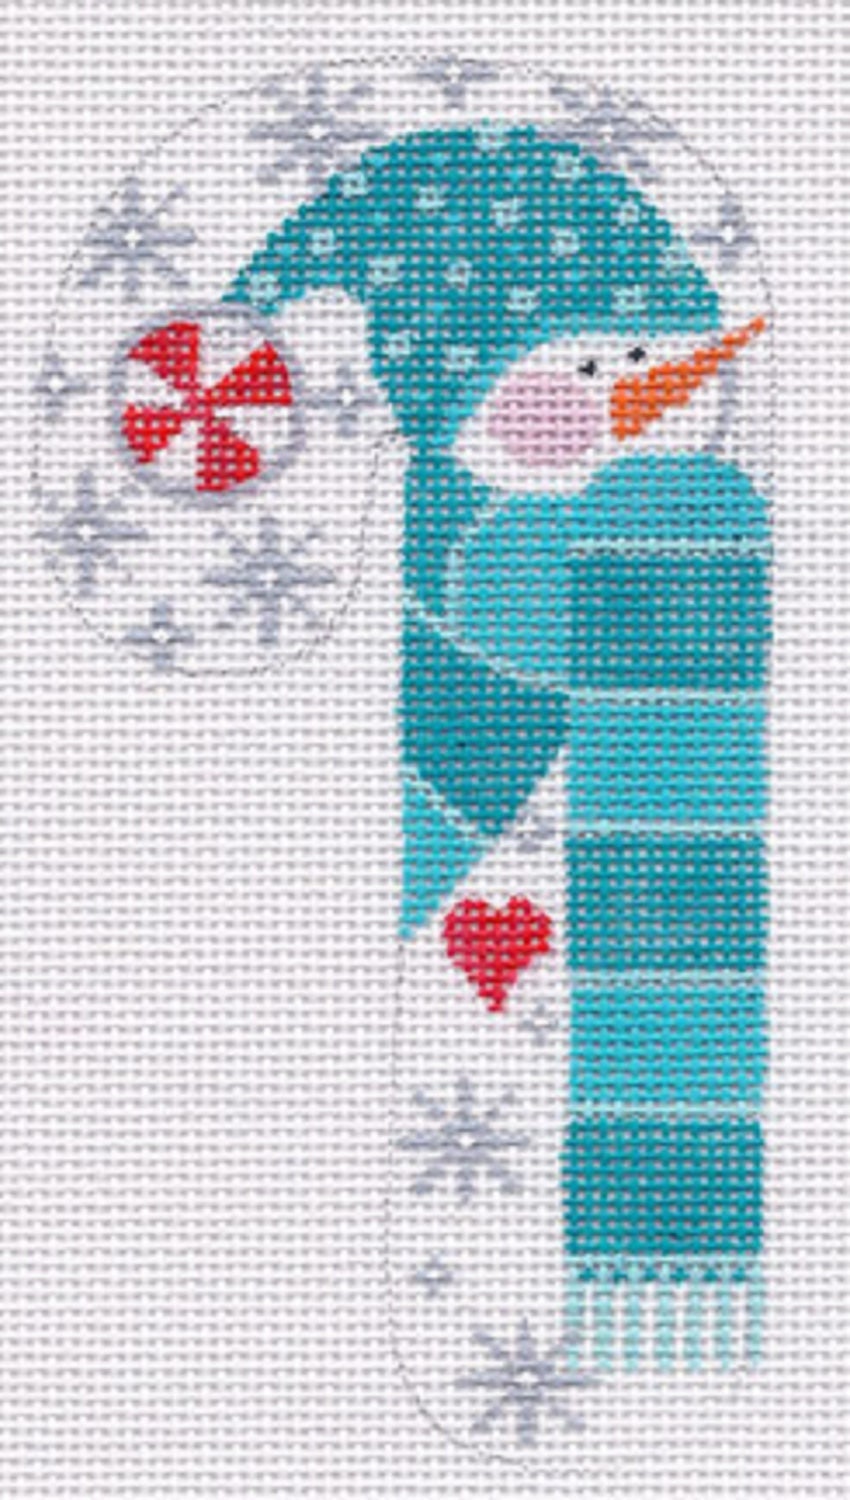 Needlepoint Handpainted Christmas Danji Candy Cane Snowman Peppermint -Free Us Shipping